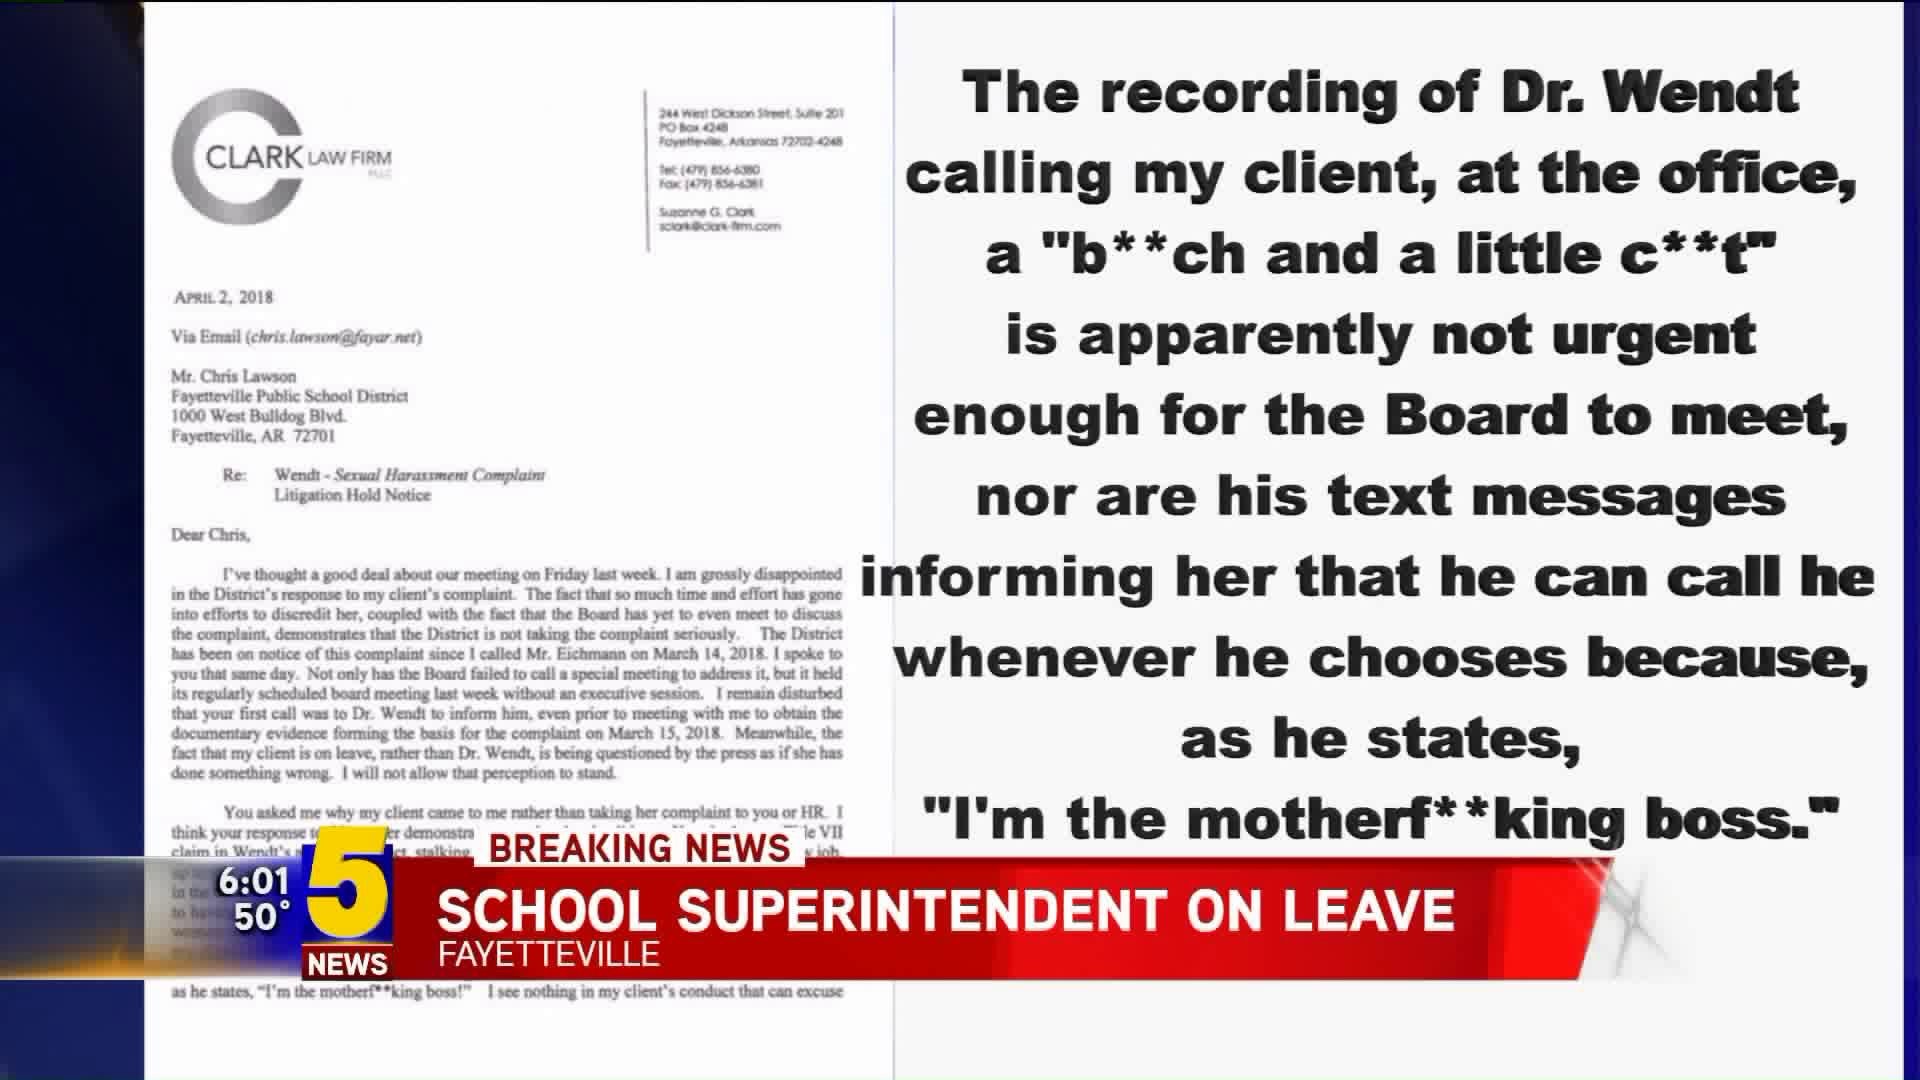 Fayetteville School Superintendent On Paid Leave